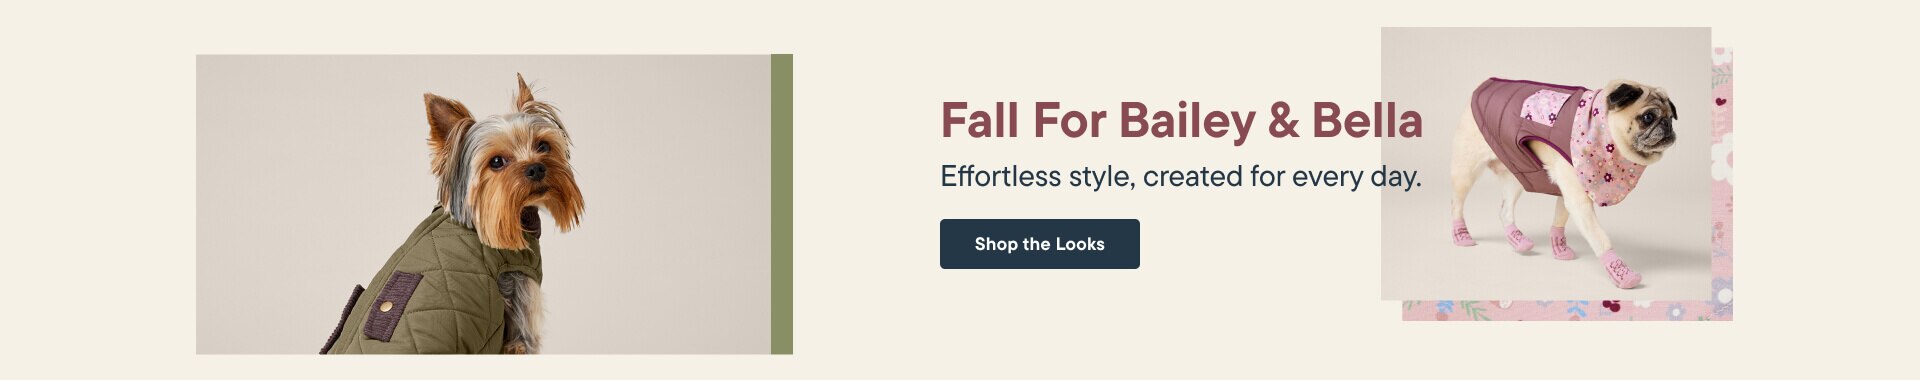 Fall for Bailey & Bella style - Shop the Looks